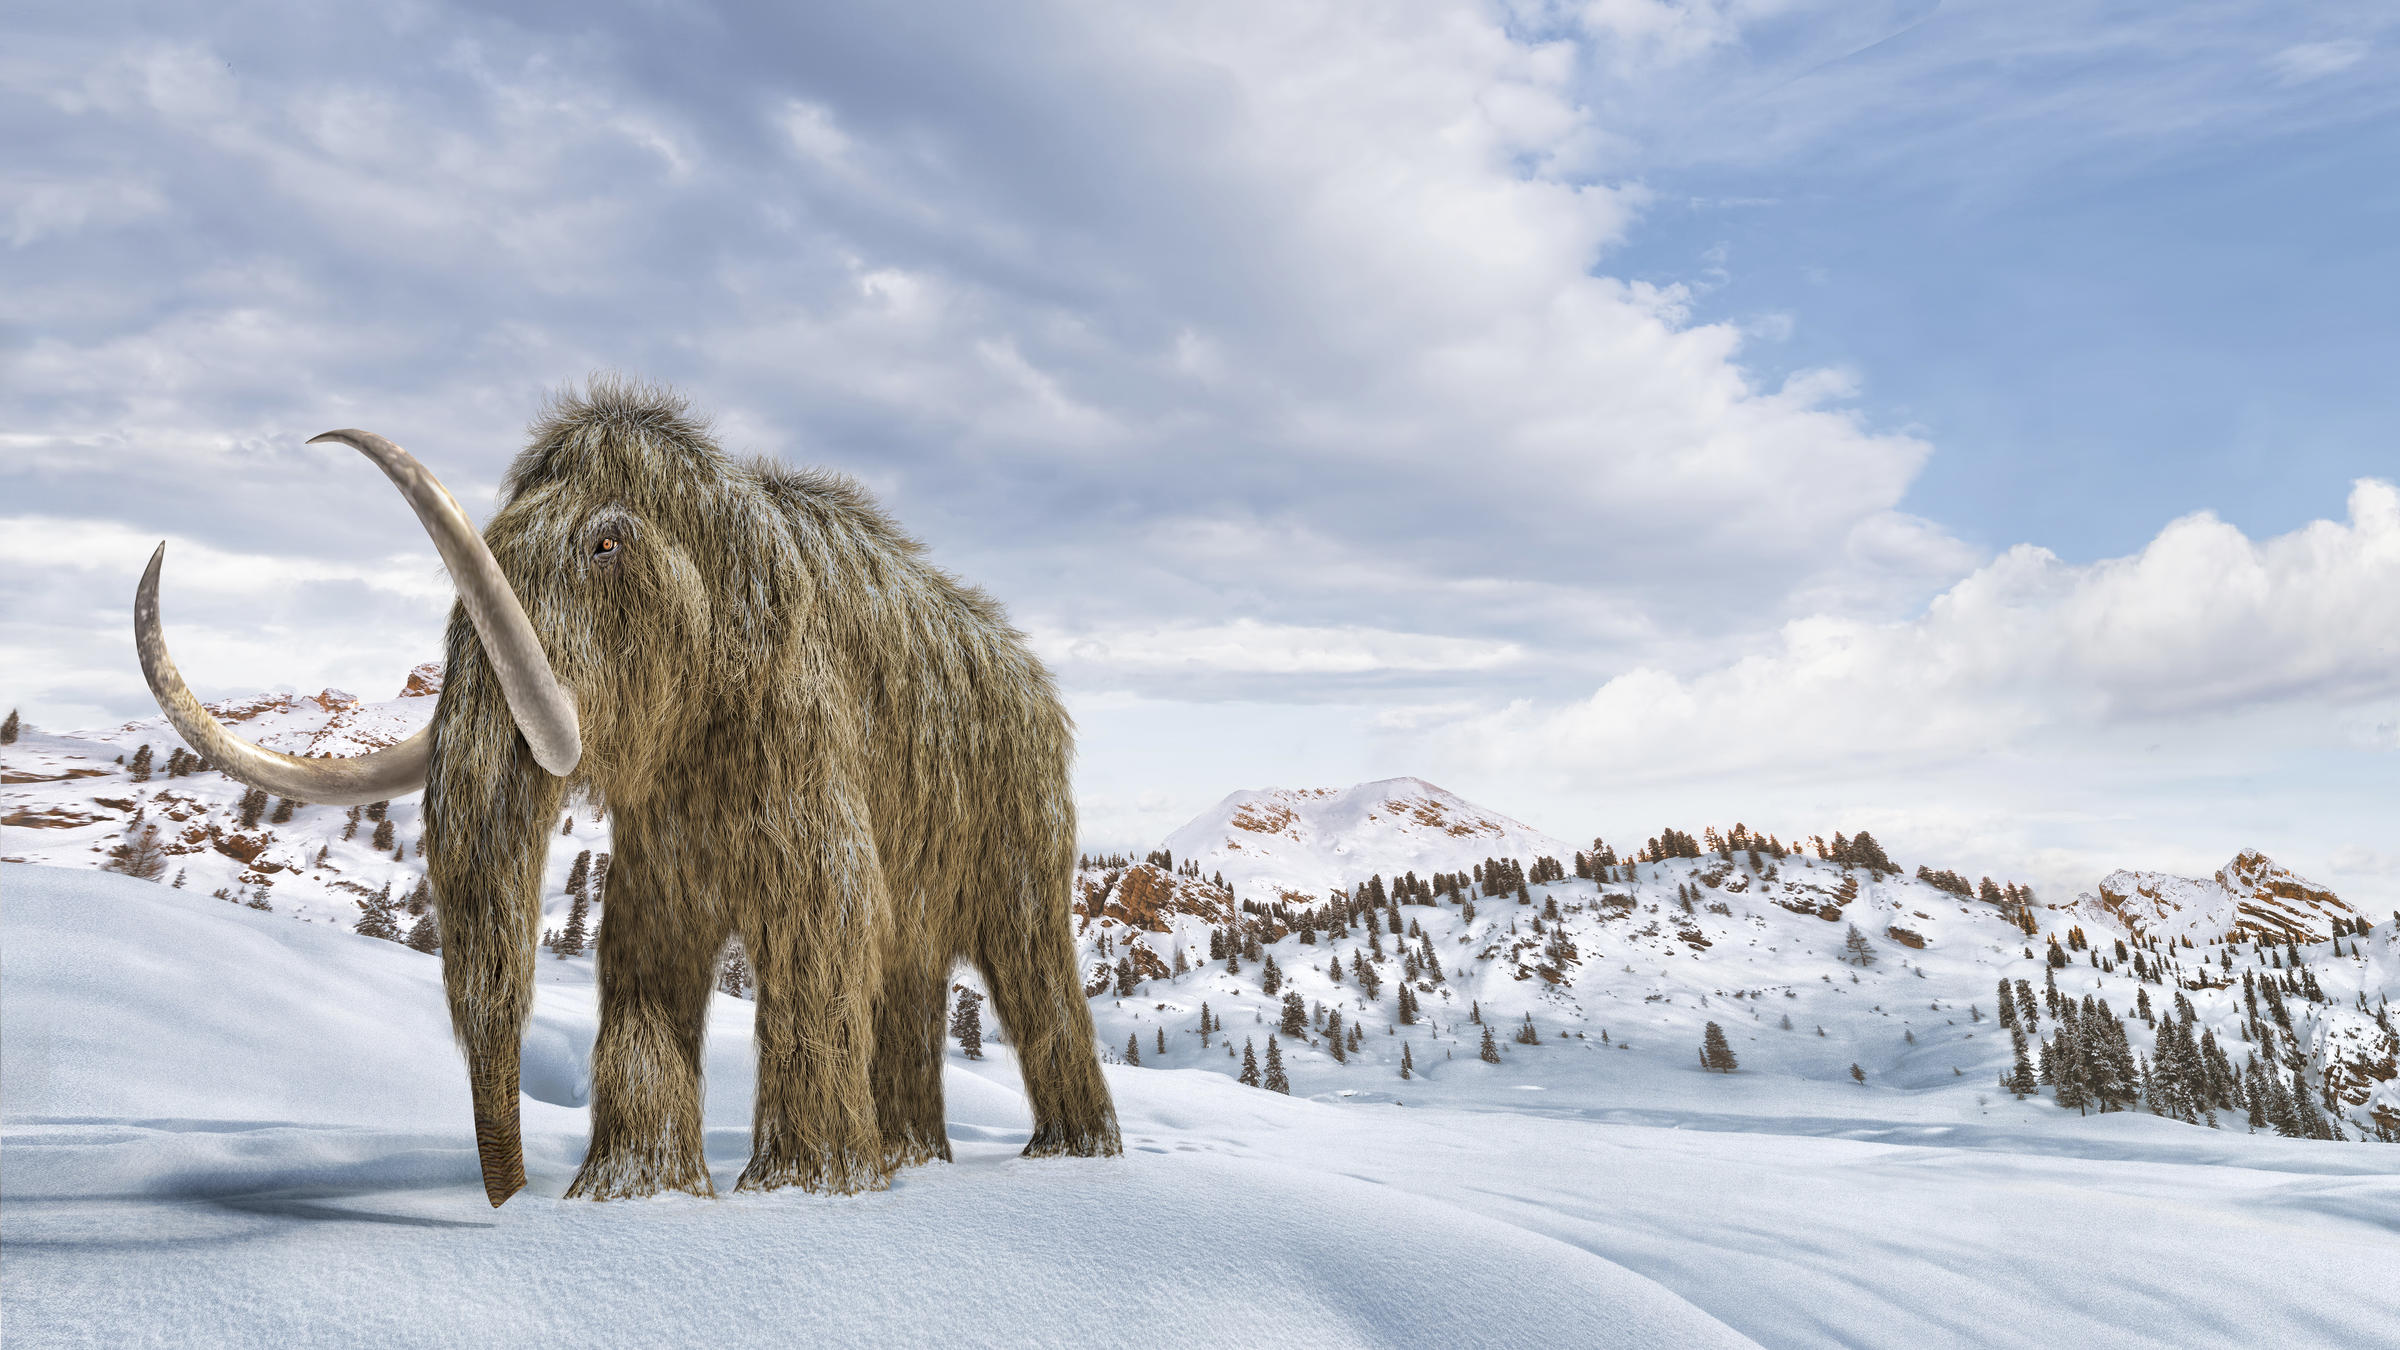 Scientists Say They Could Bring Back Woolly Mammoths. But Maybe They